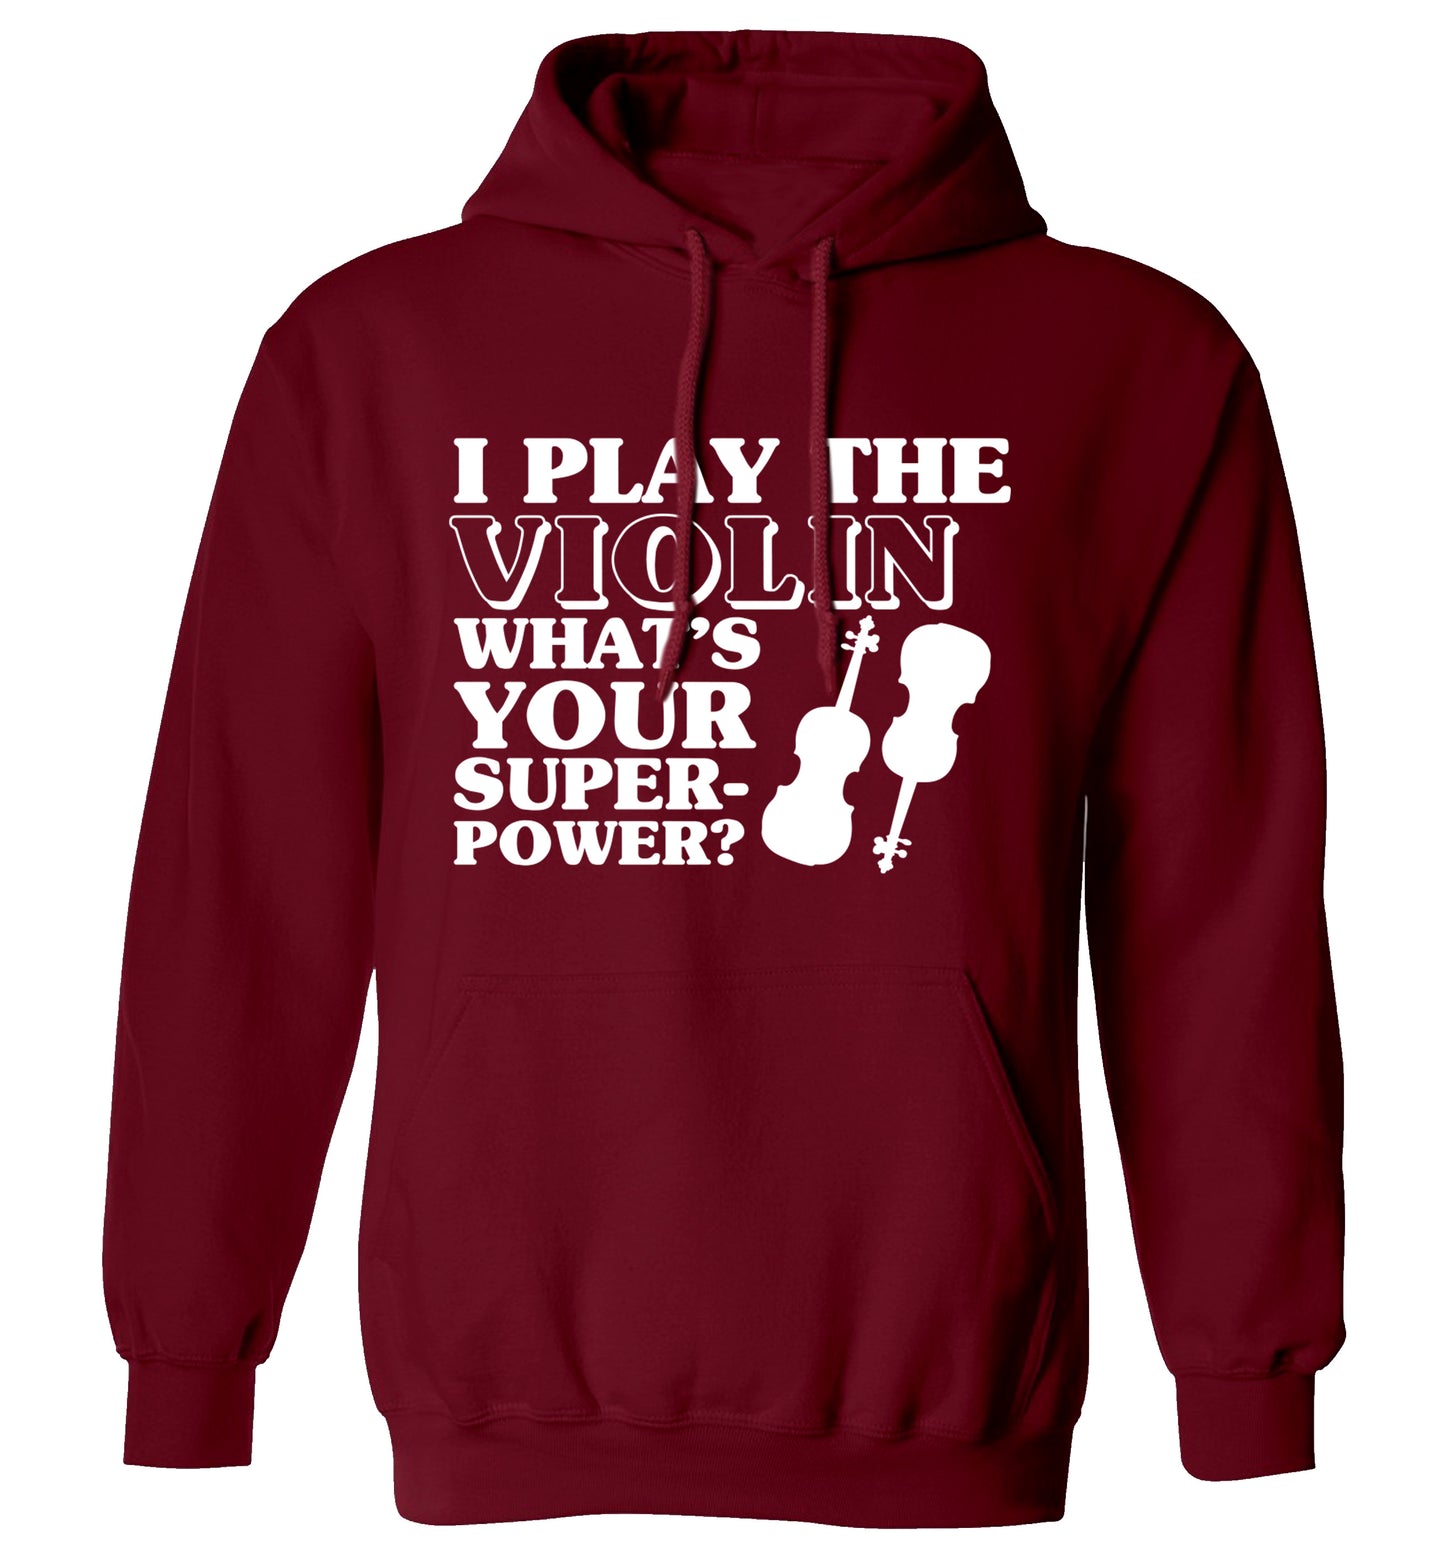 I Play Violin What's Your Superpower? adults unisex maroon hoodie 2XL